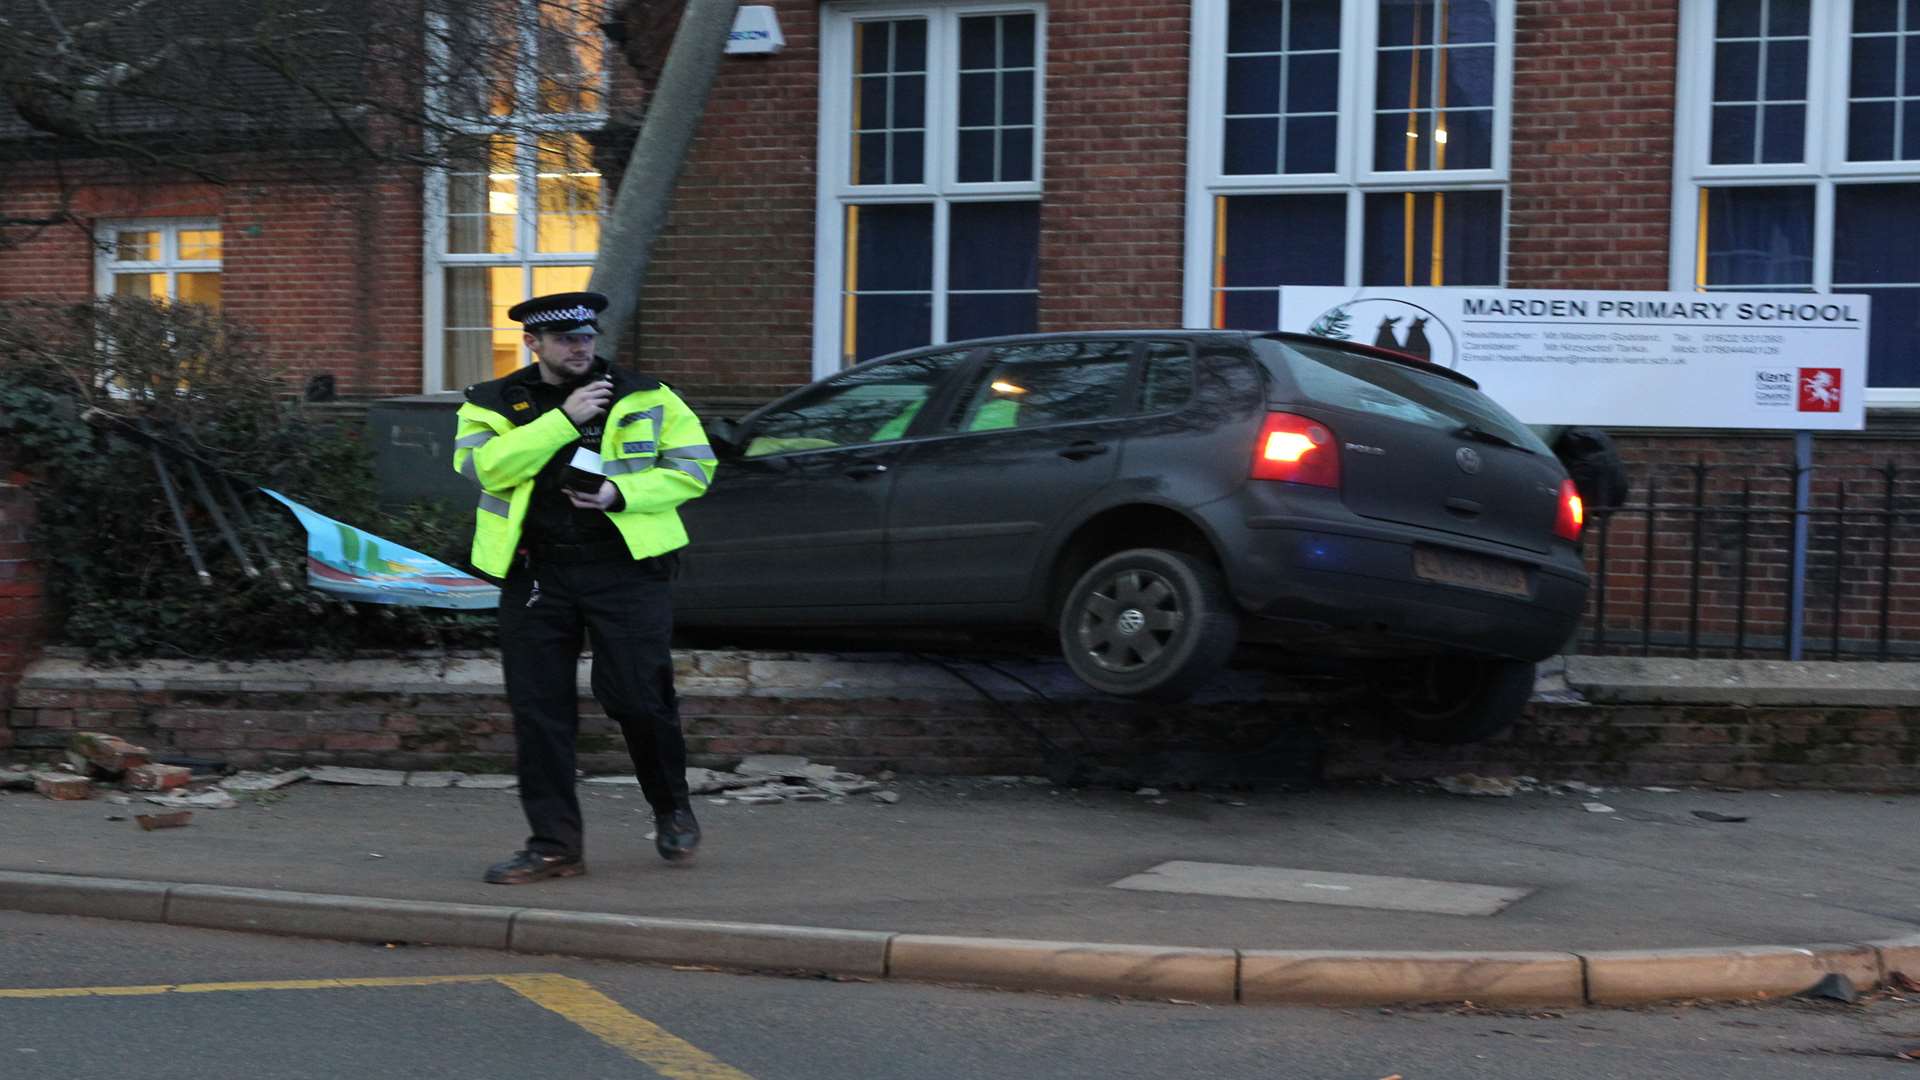 A black Polo crashed into Marden Primary School an hour before the school run. Picture: John Westhrop.